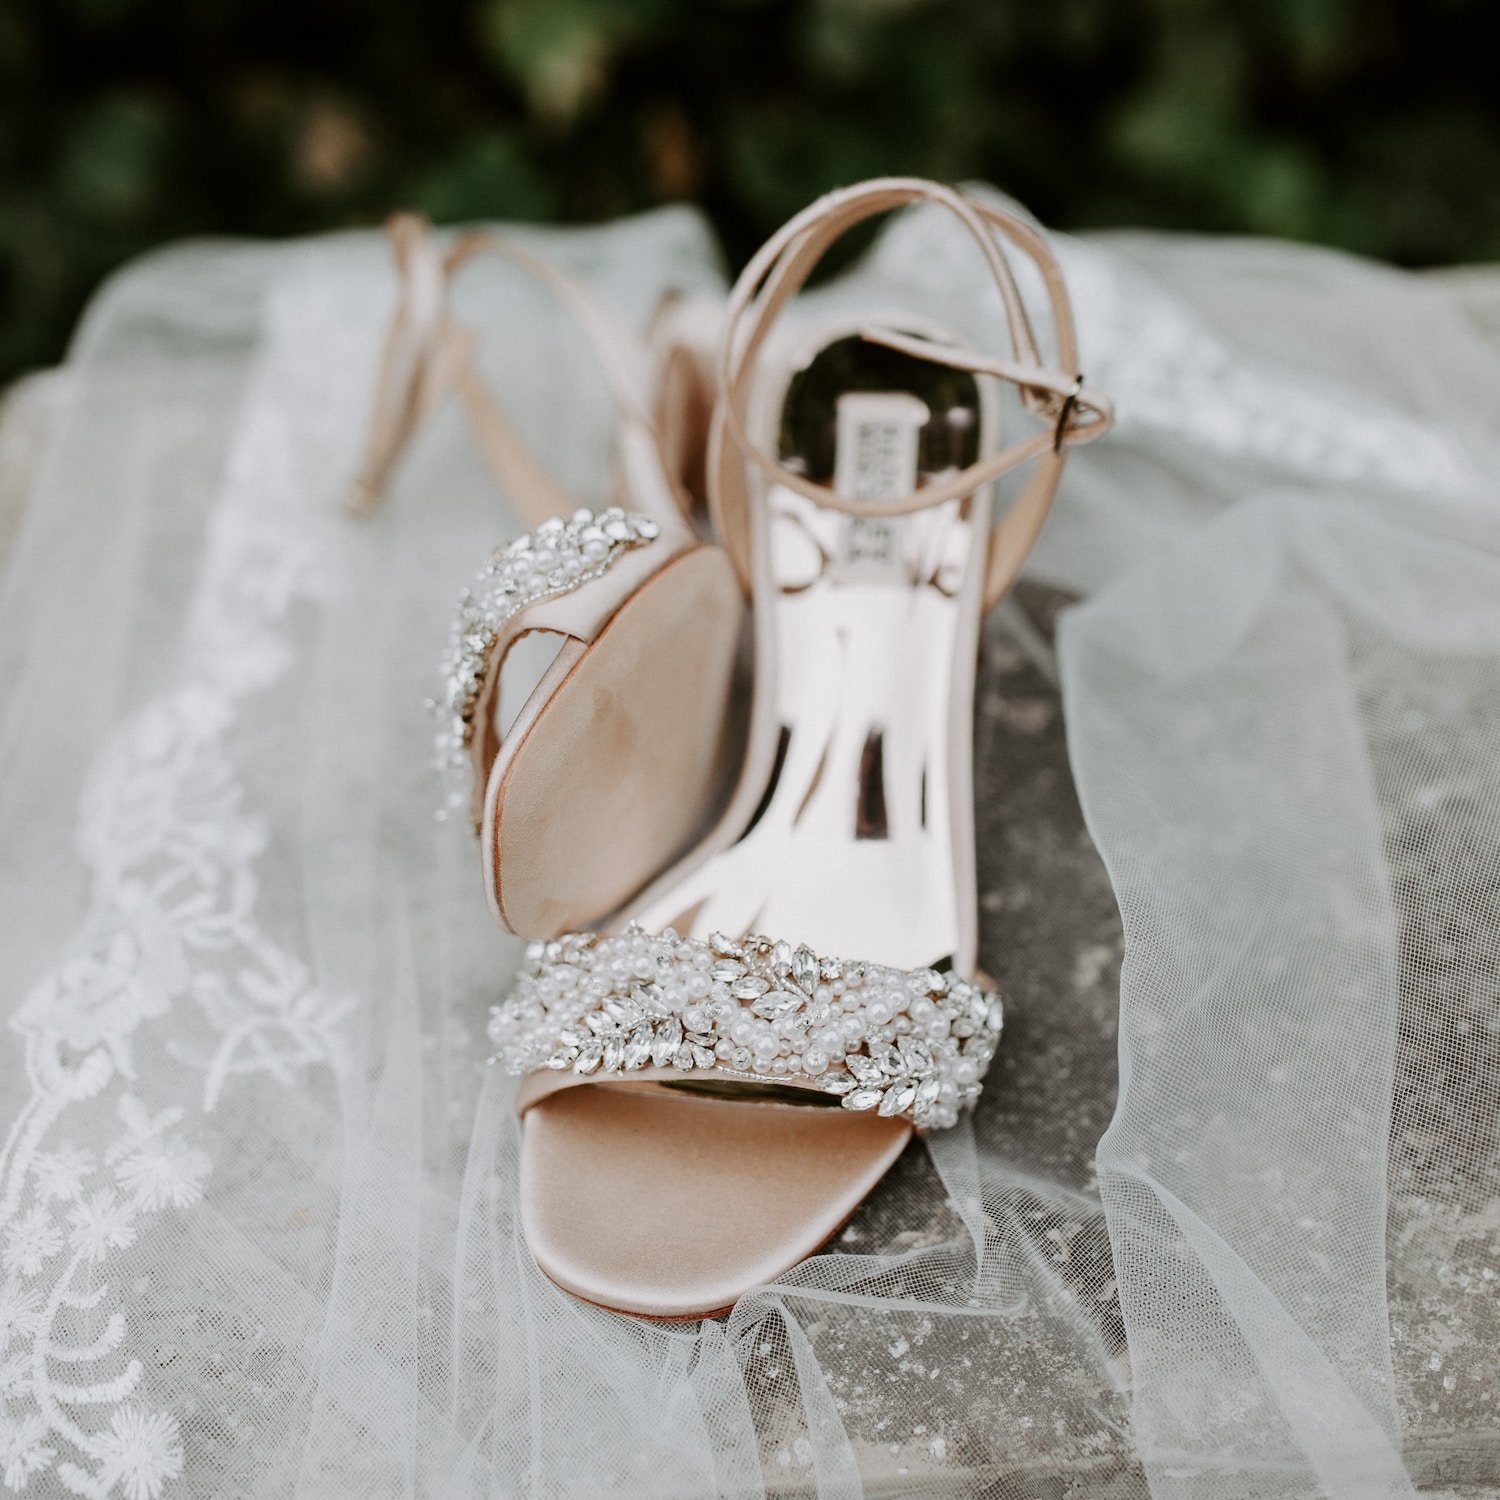 How to Find Your Perfect Bridal Shoes